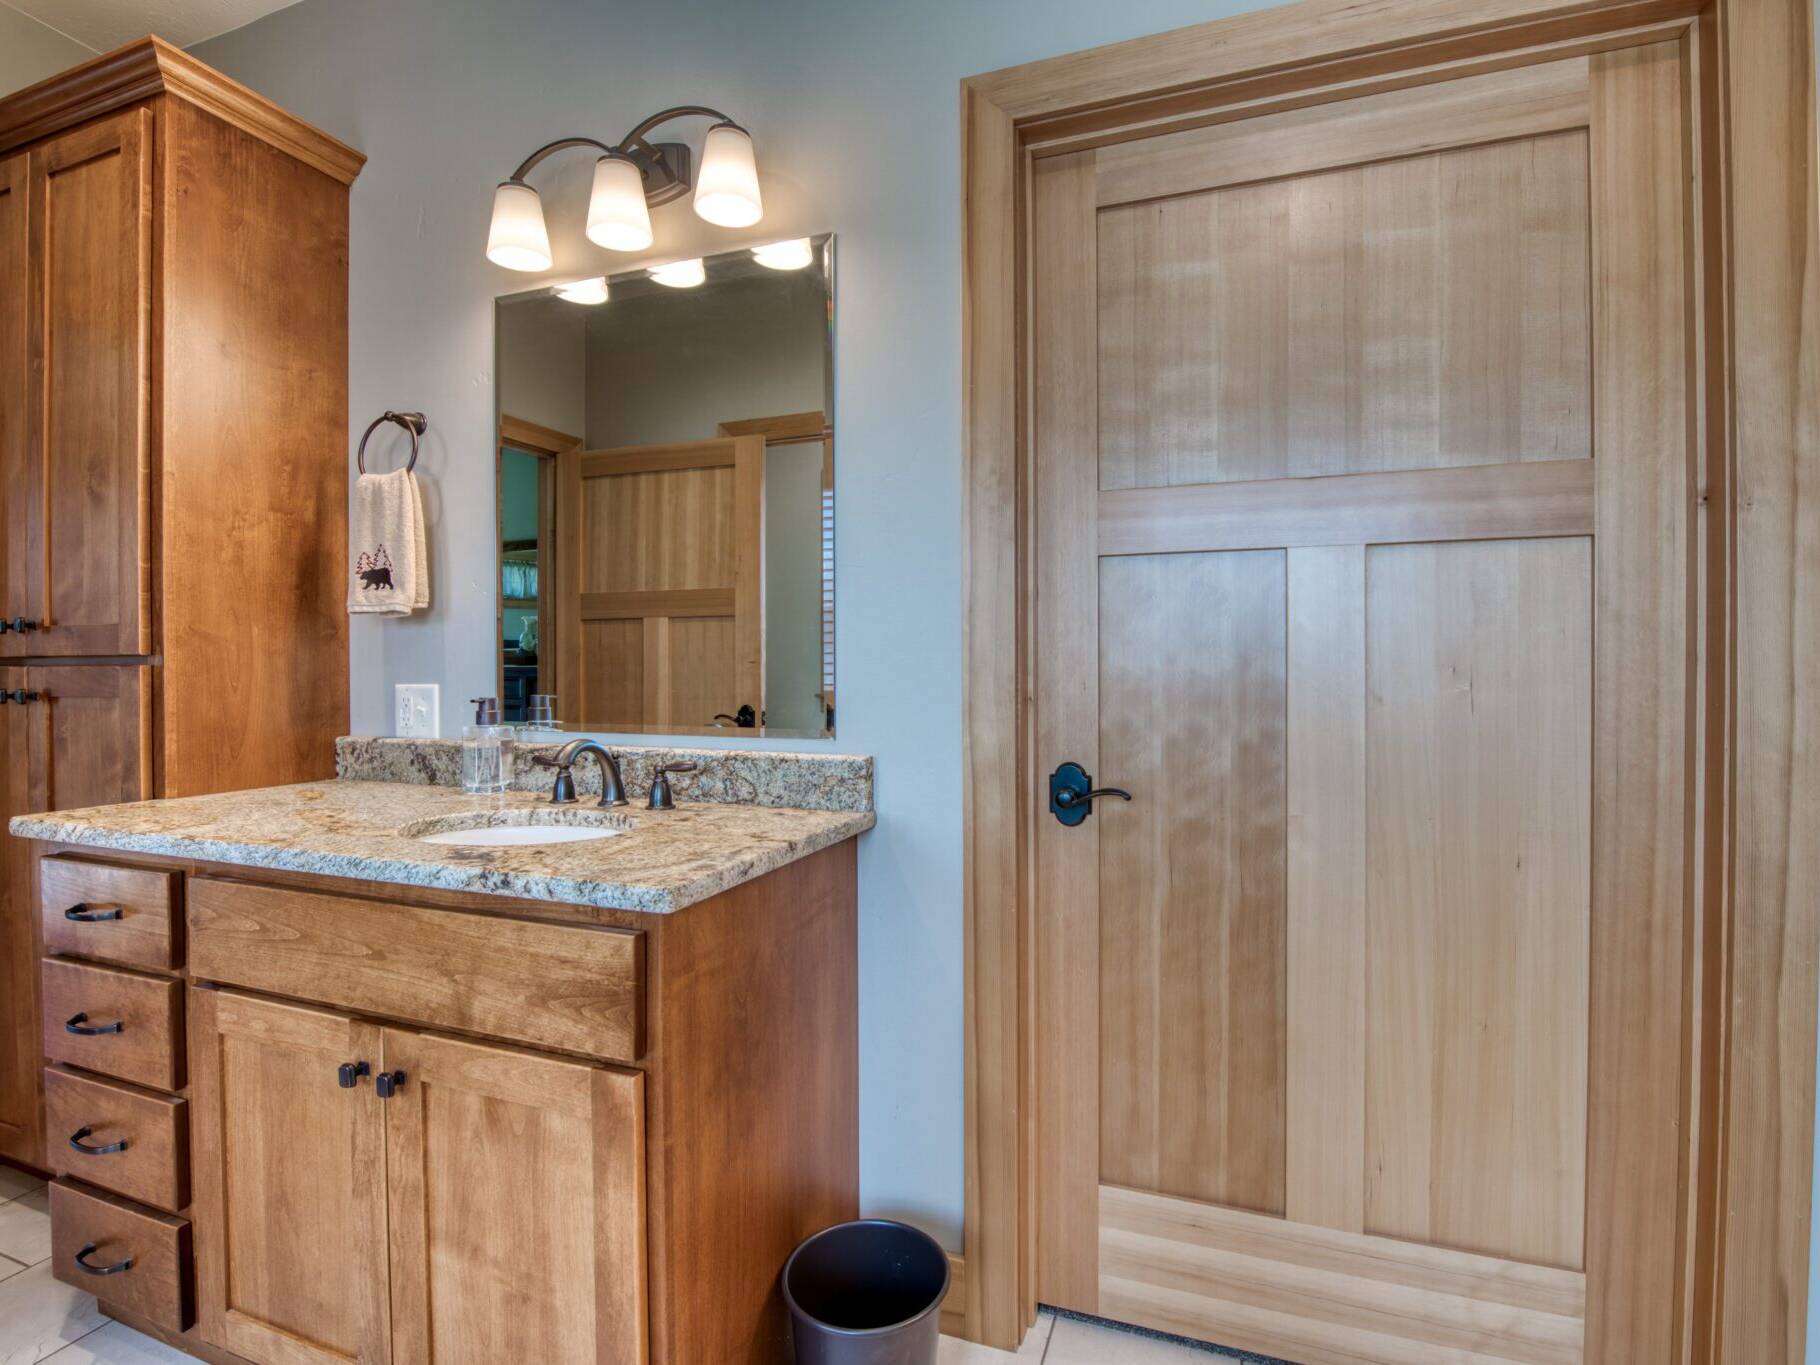 Master bathroom with tile flooring, wood cabinetry, trim and doors in a custom home near Hamilton, MT.